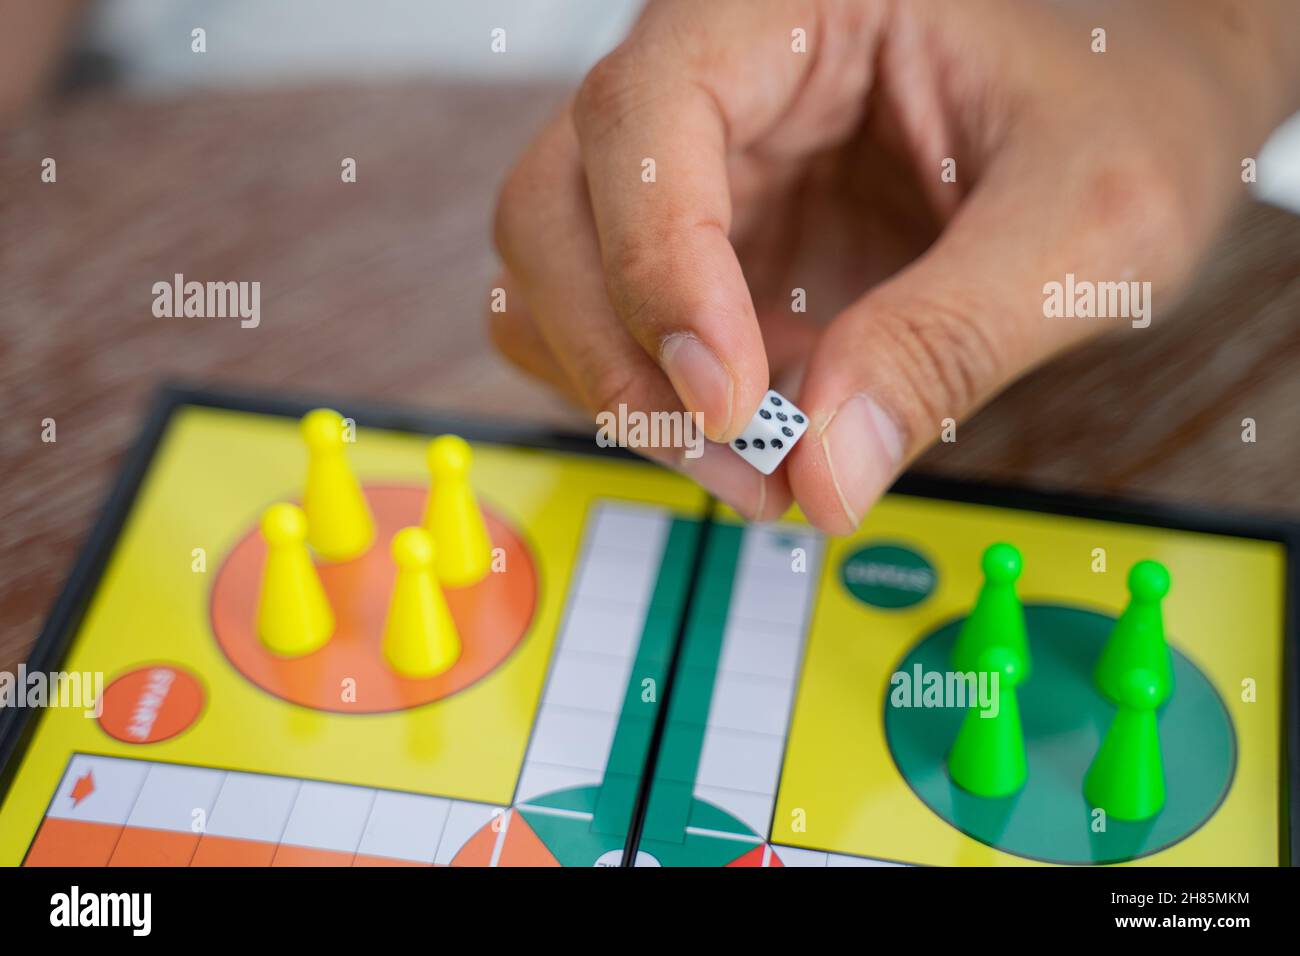 Close up of hand holding dice while playing ludo Stock Photo